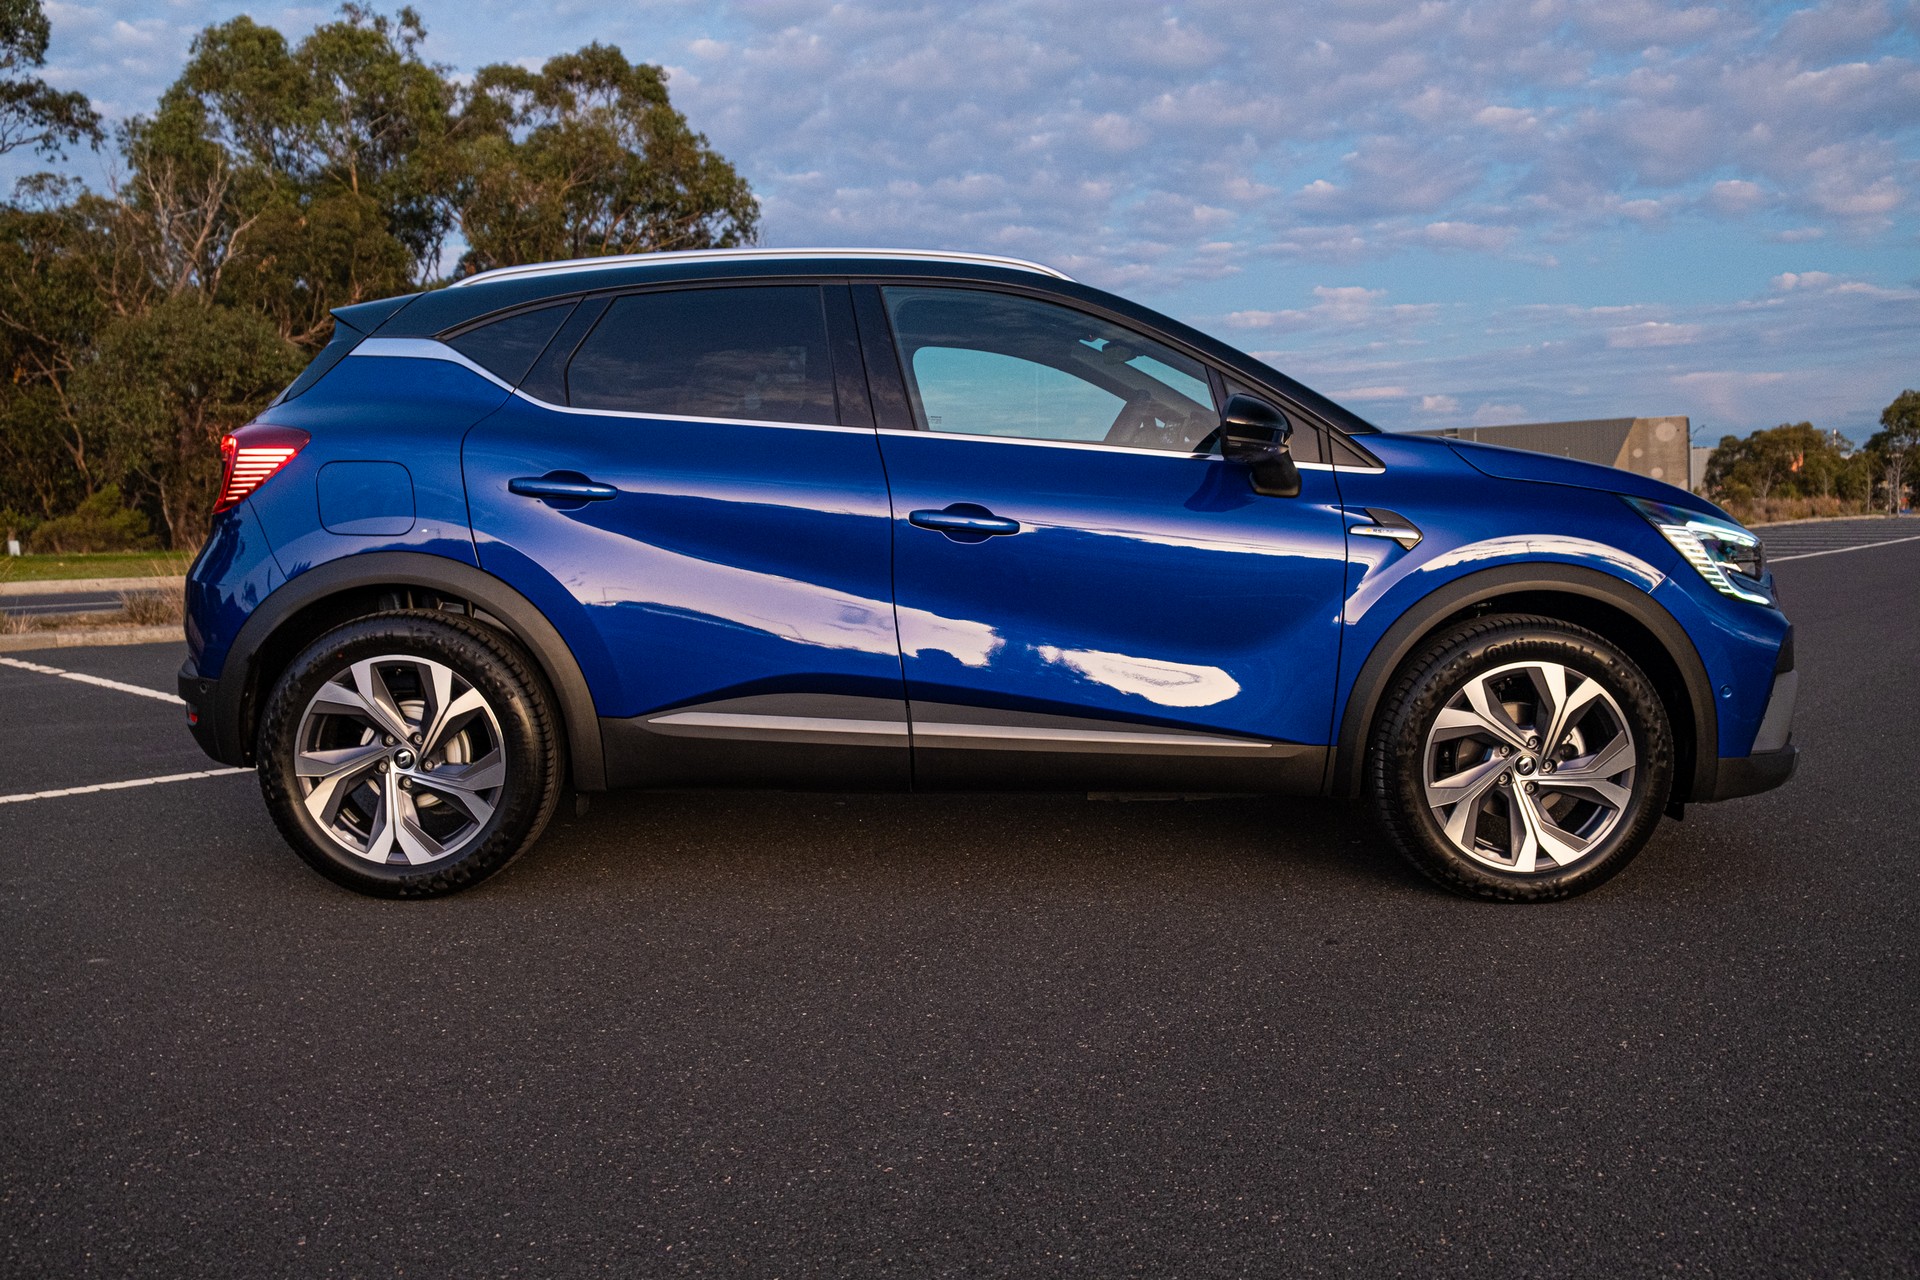 Driven: 2022 Renault Captur R.S. Line Is One Of The Best In Class